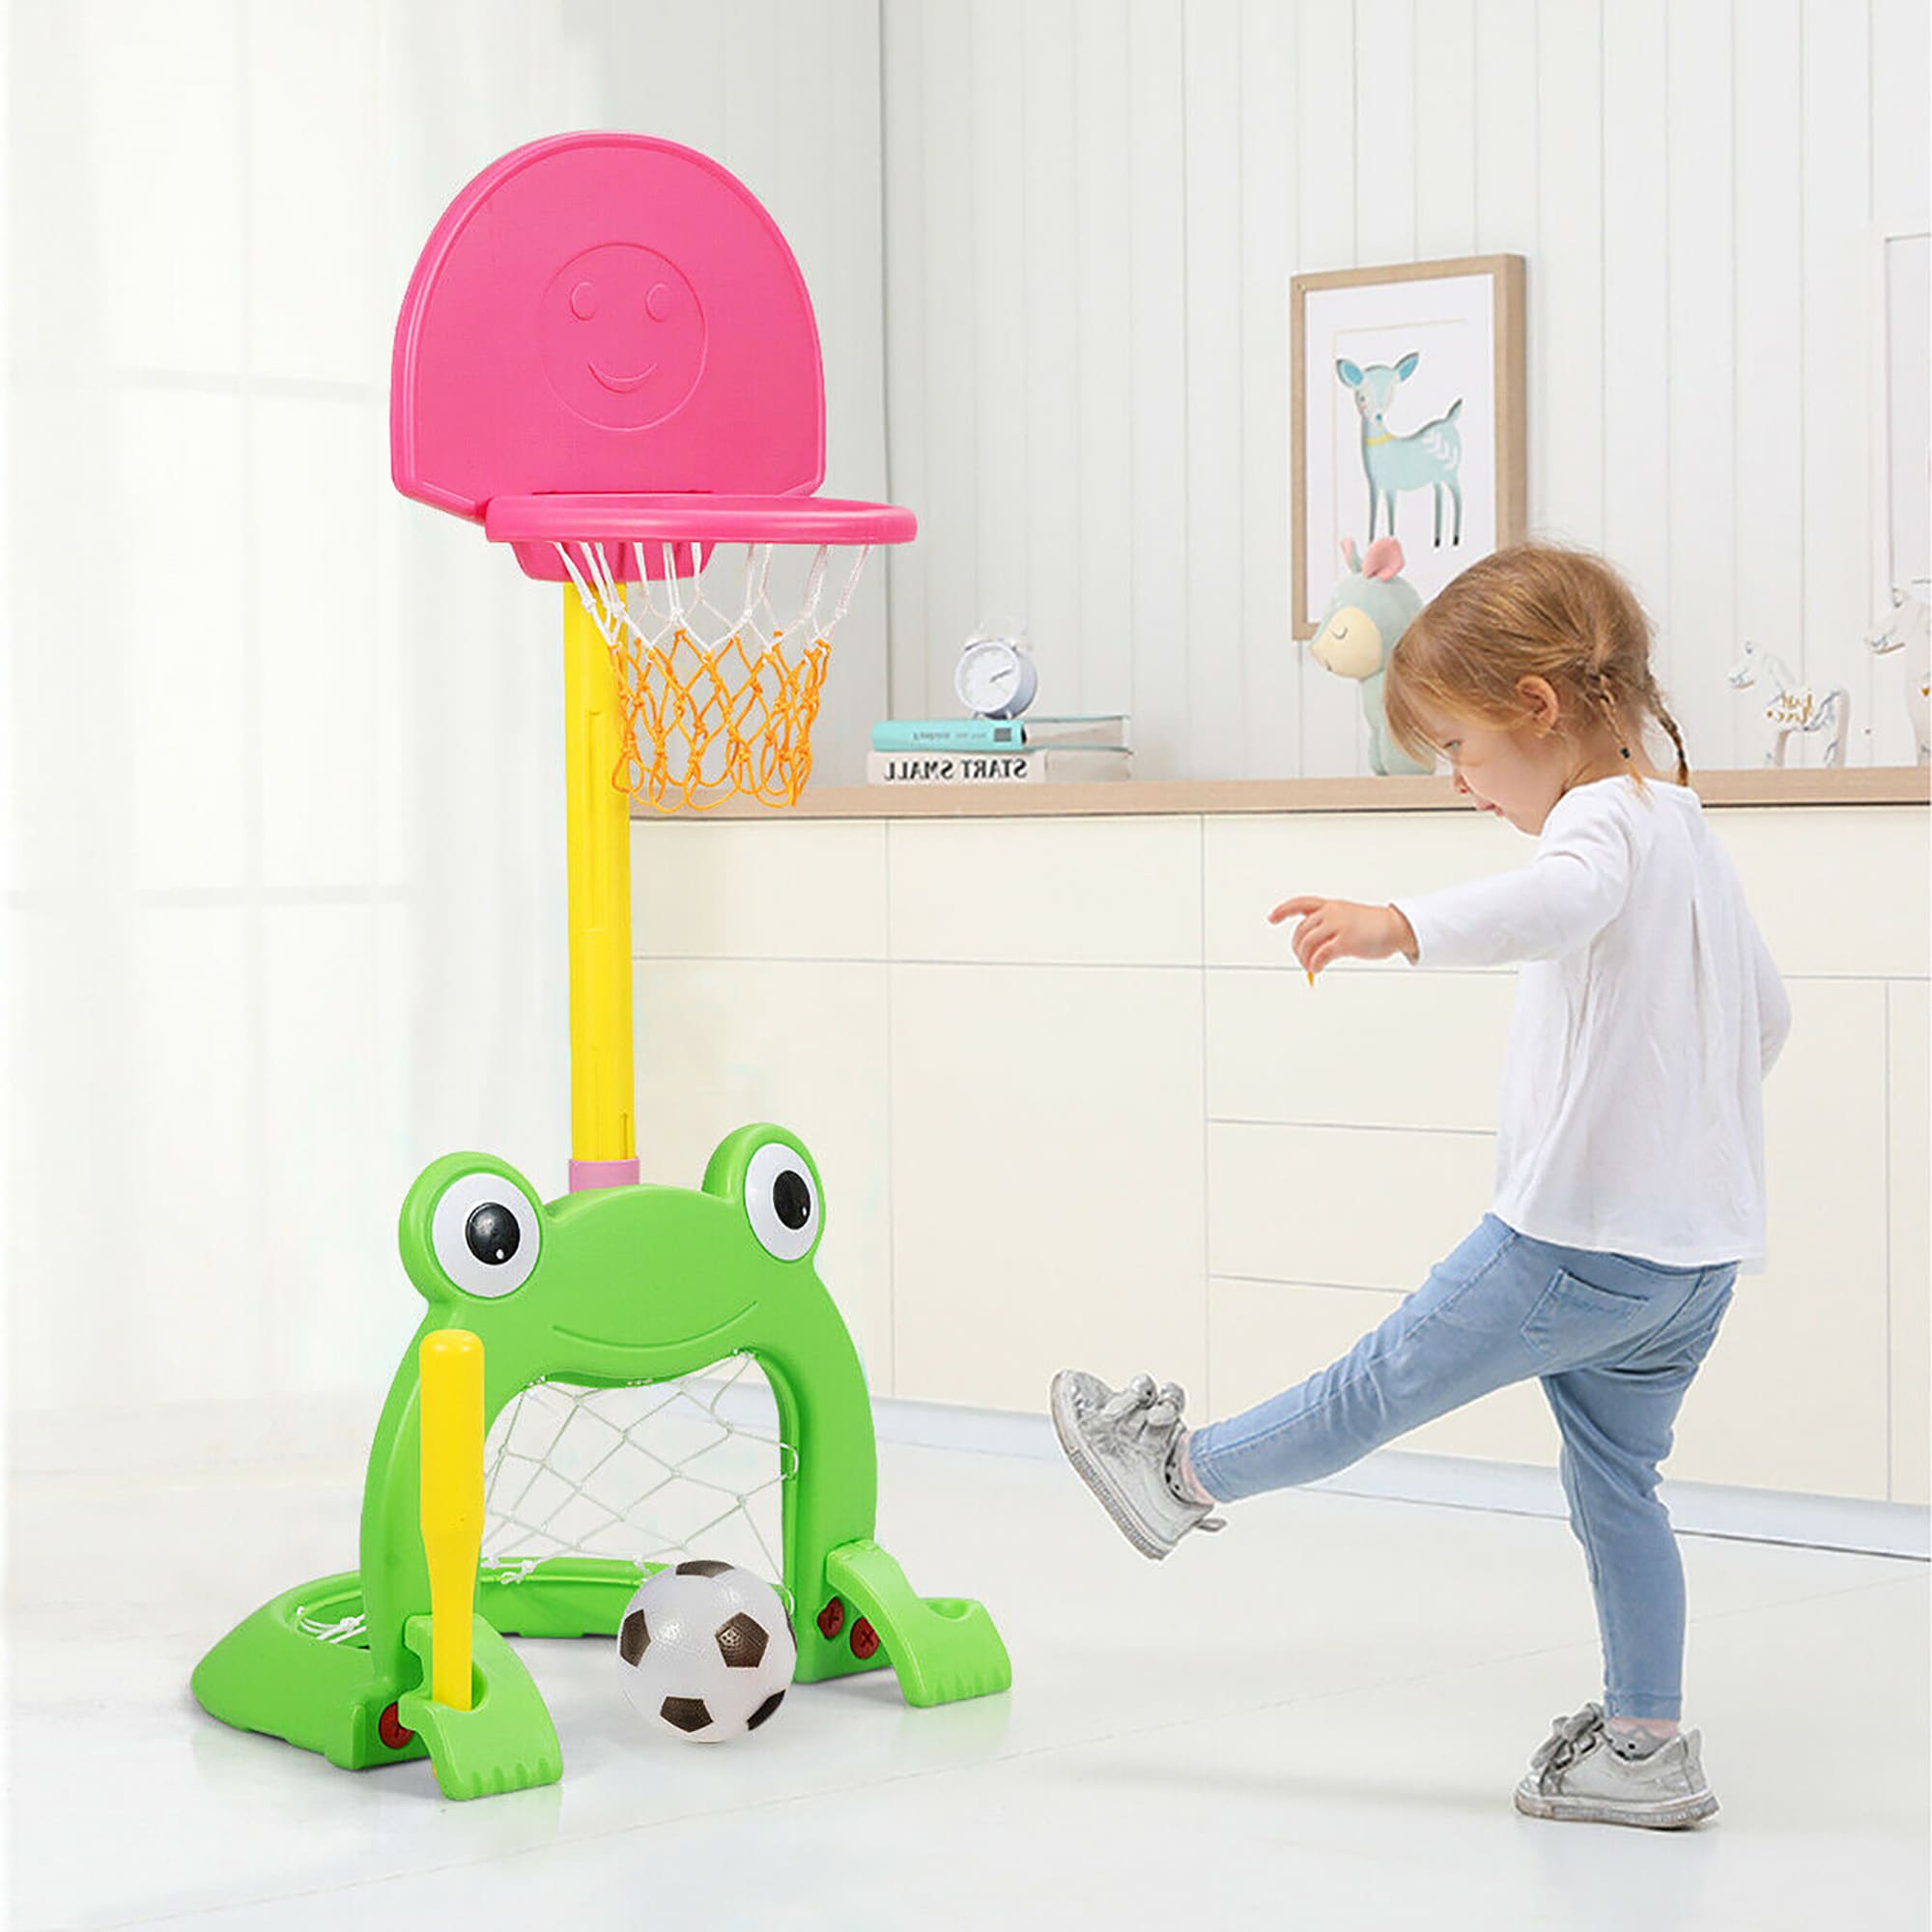 Free Standing 3-in-1 Kids Basketball Hoop Stand Activity Center Play Set Adjust 